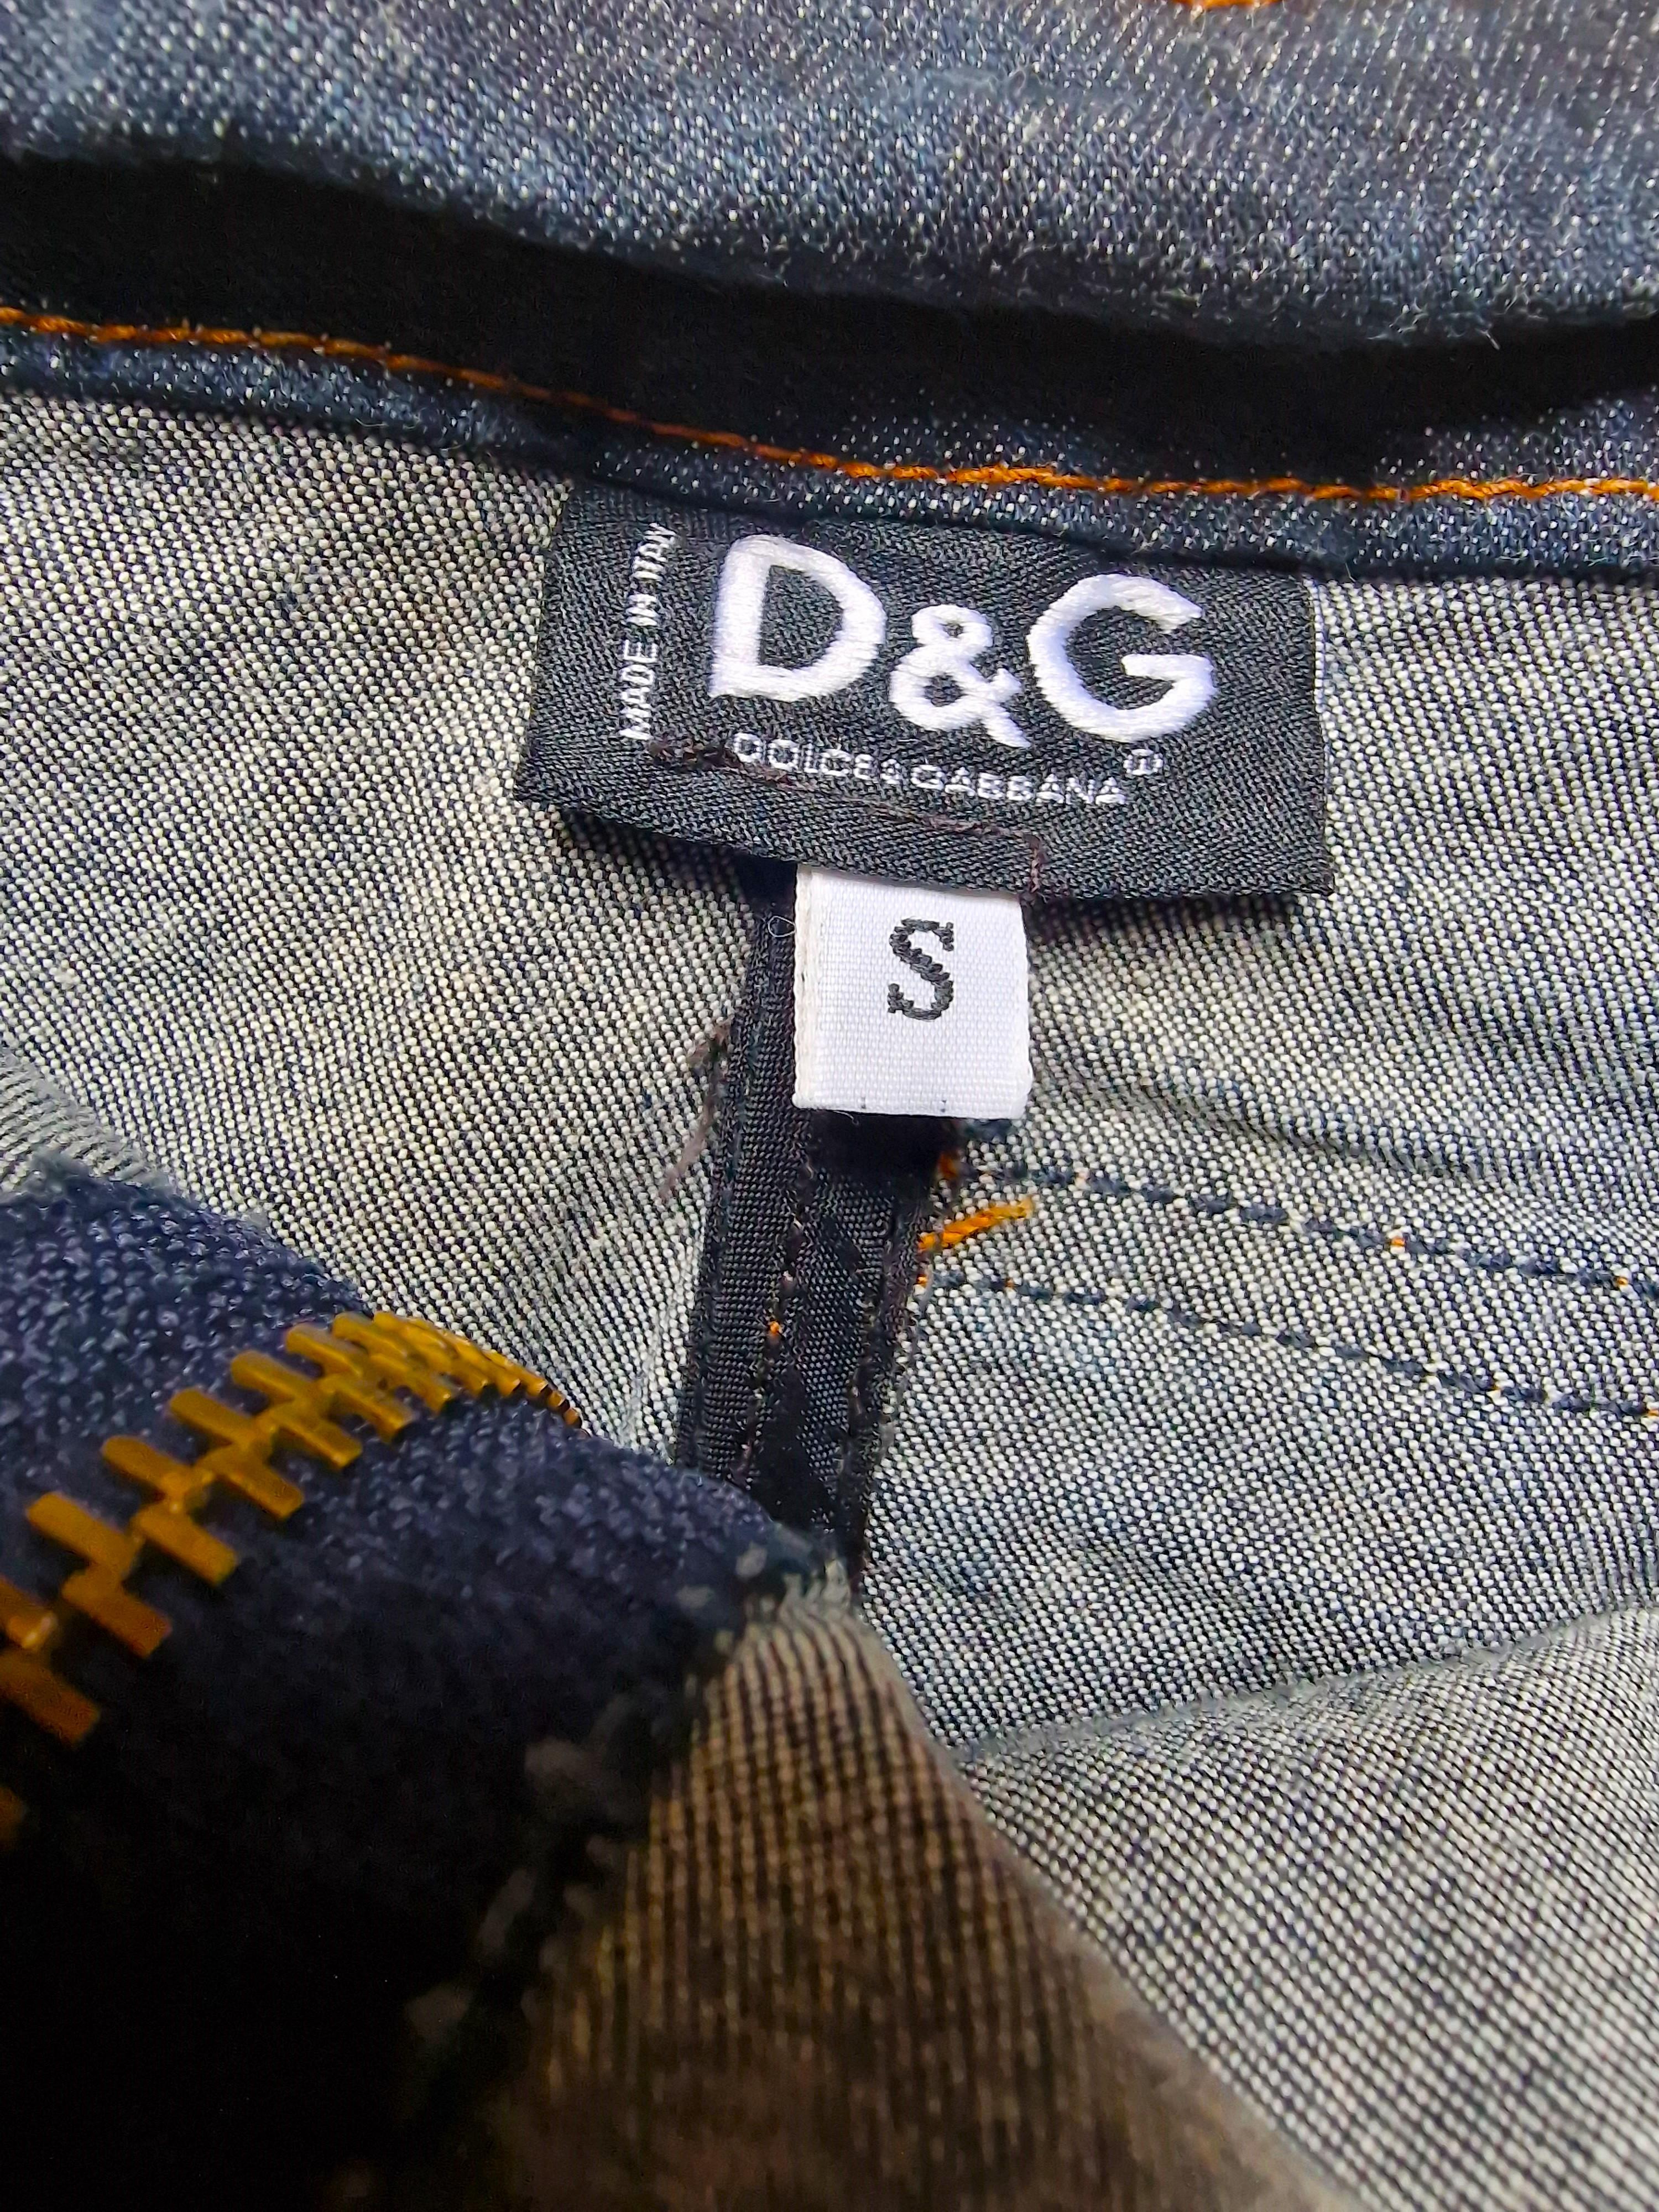 D&G Dolce and Gabbana Denim Bustier Military Vintage Small Cargo Top Corset For Sale 8